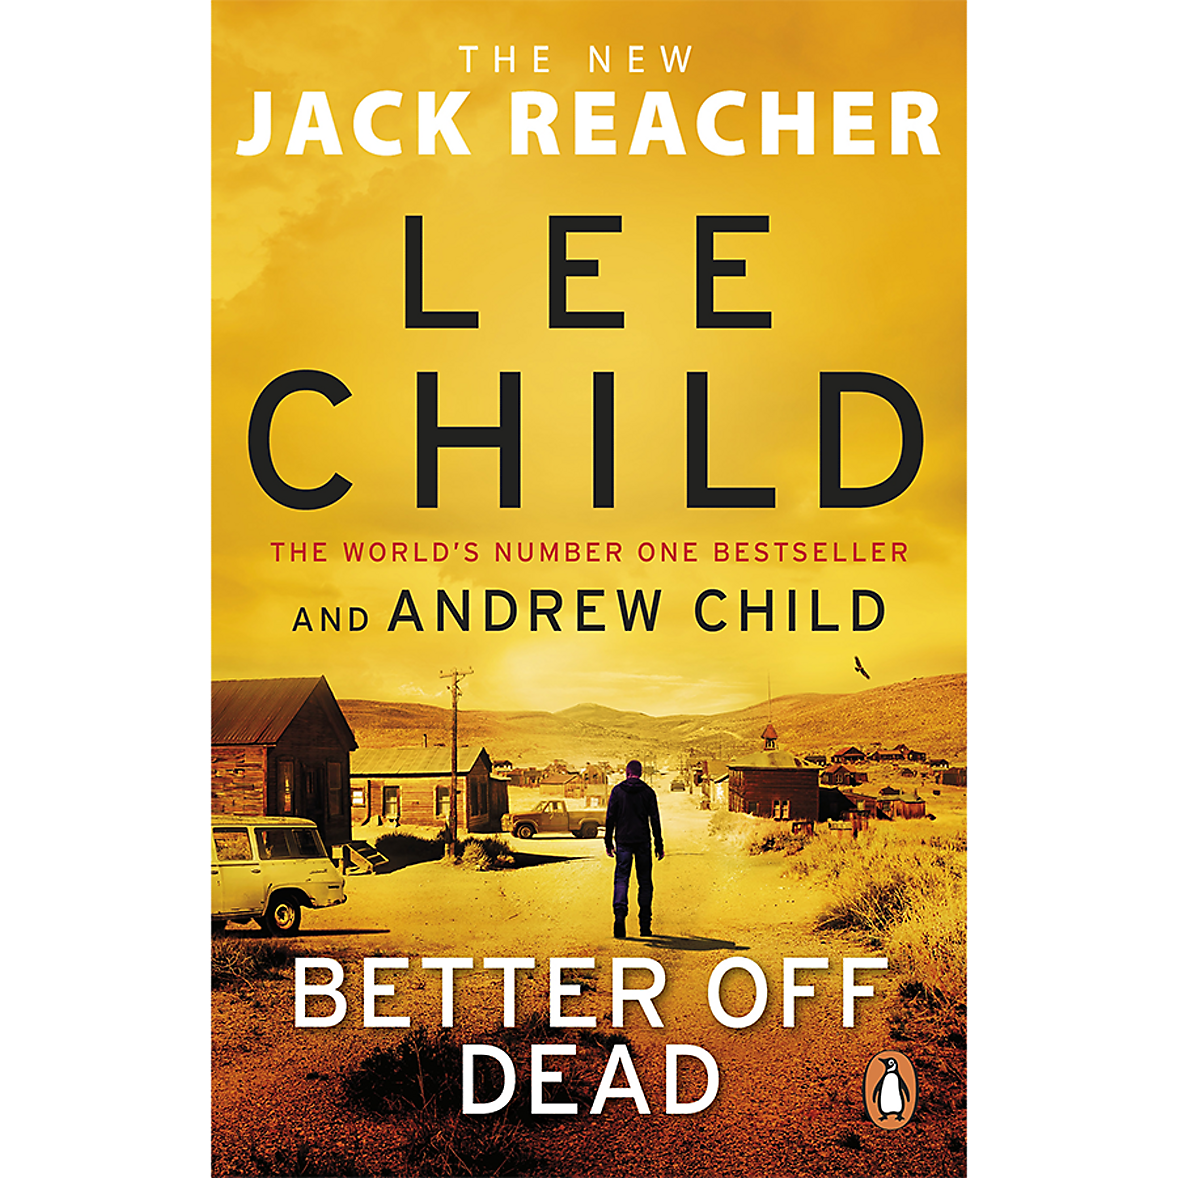 Jack Reacher- Better Off Dead by Lee Child and Andrew Child